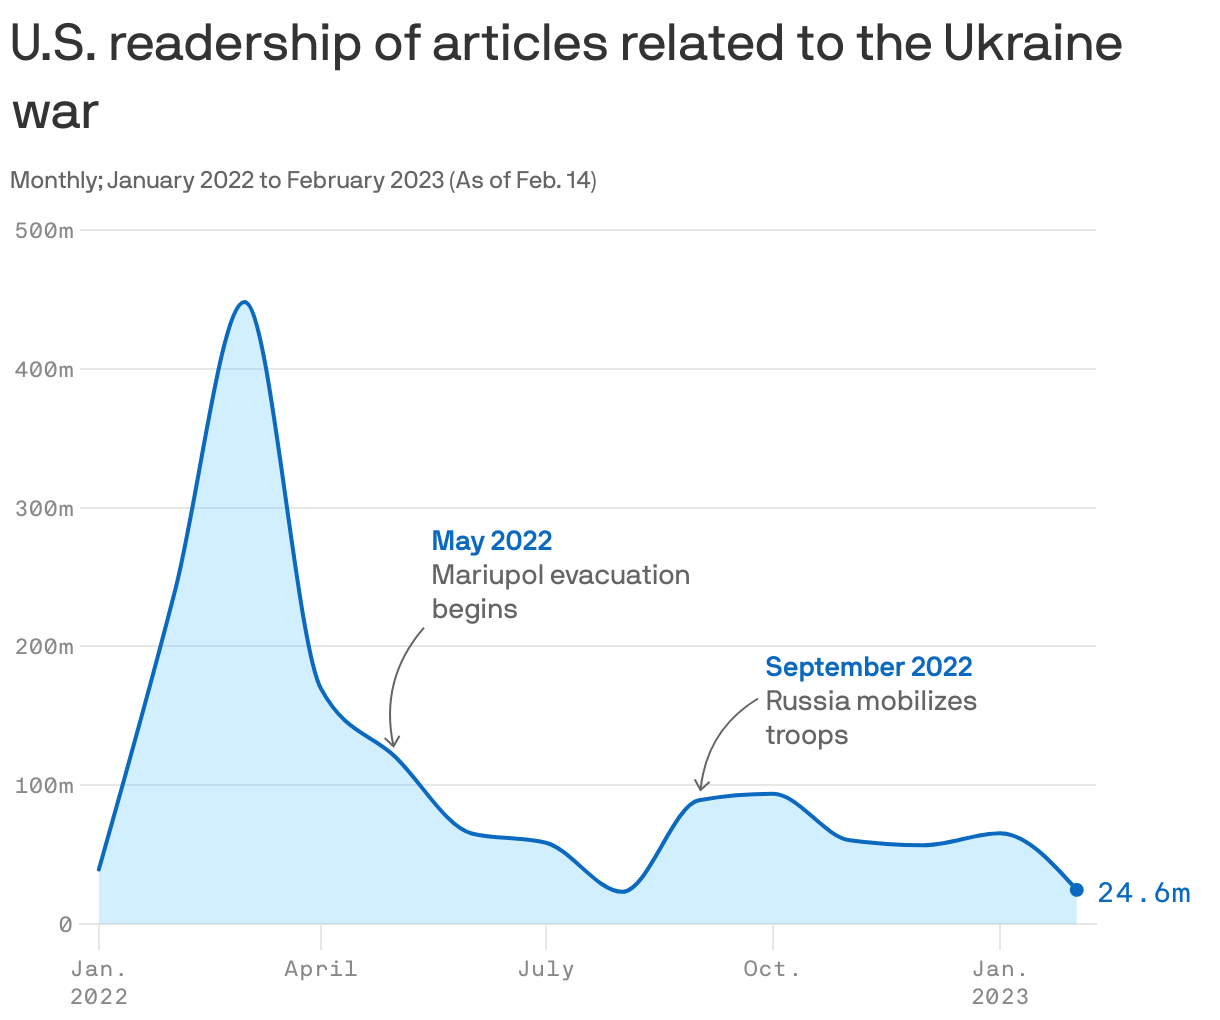 U.S. readership of articles related to the Ukraine war